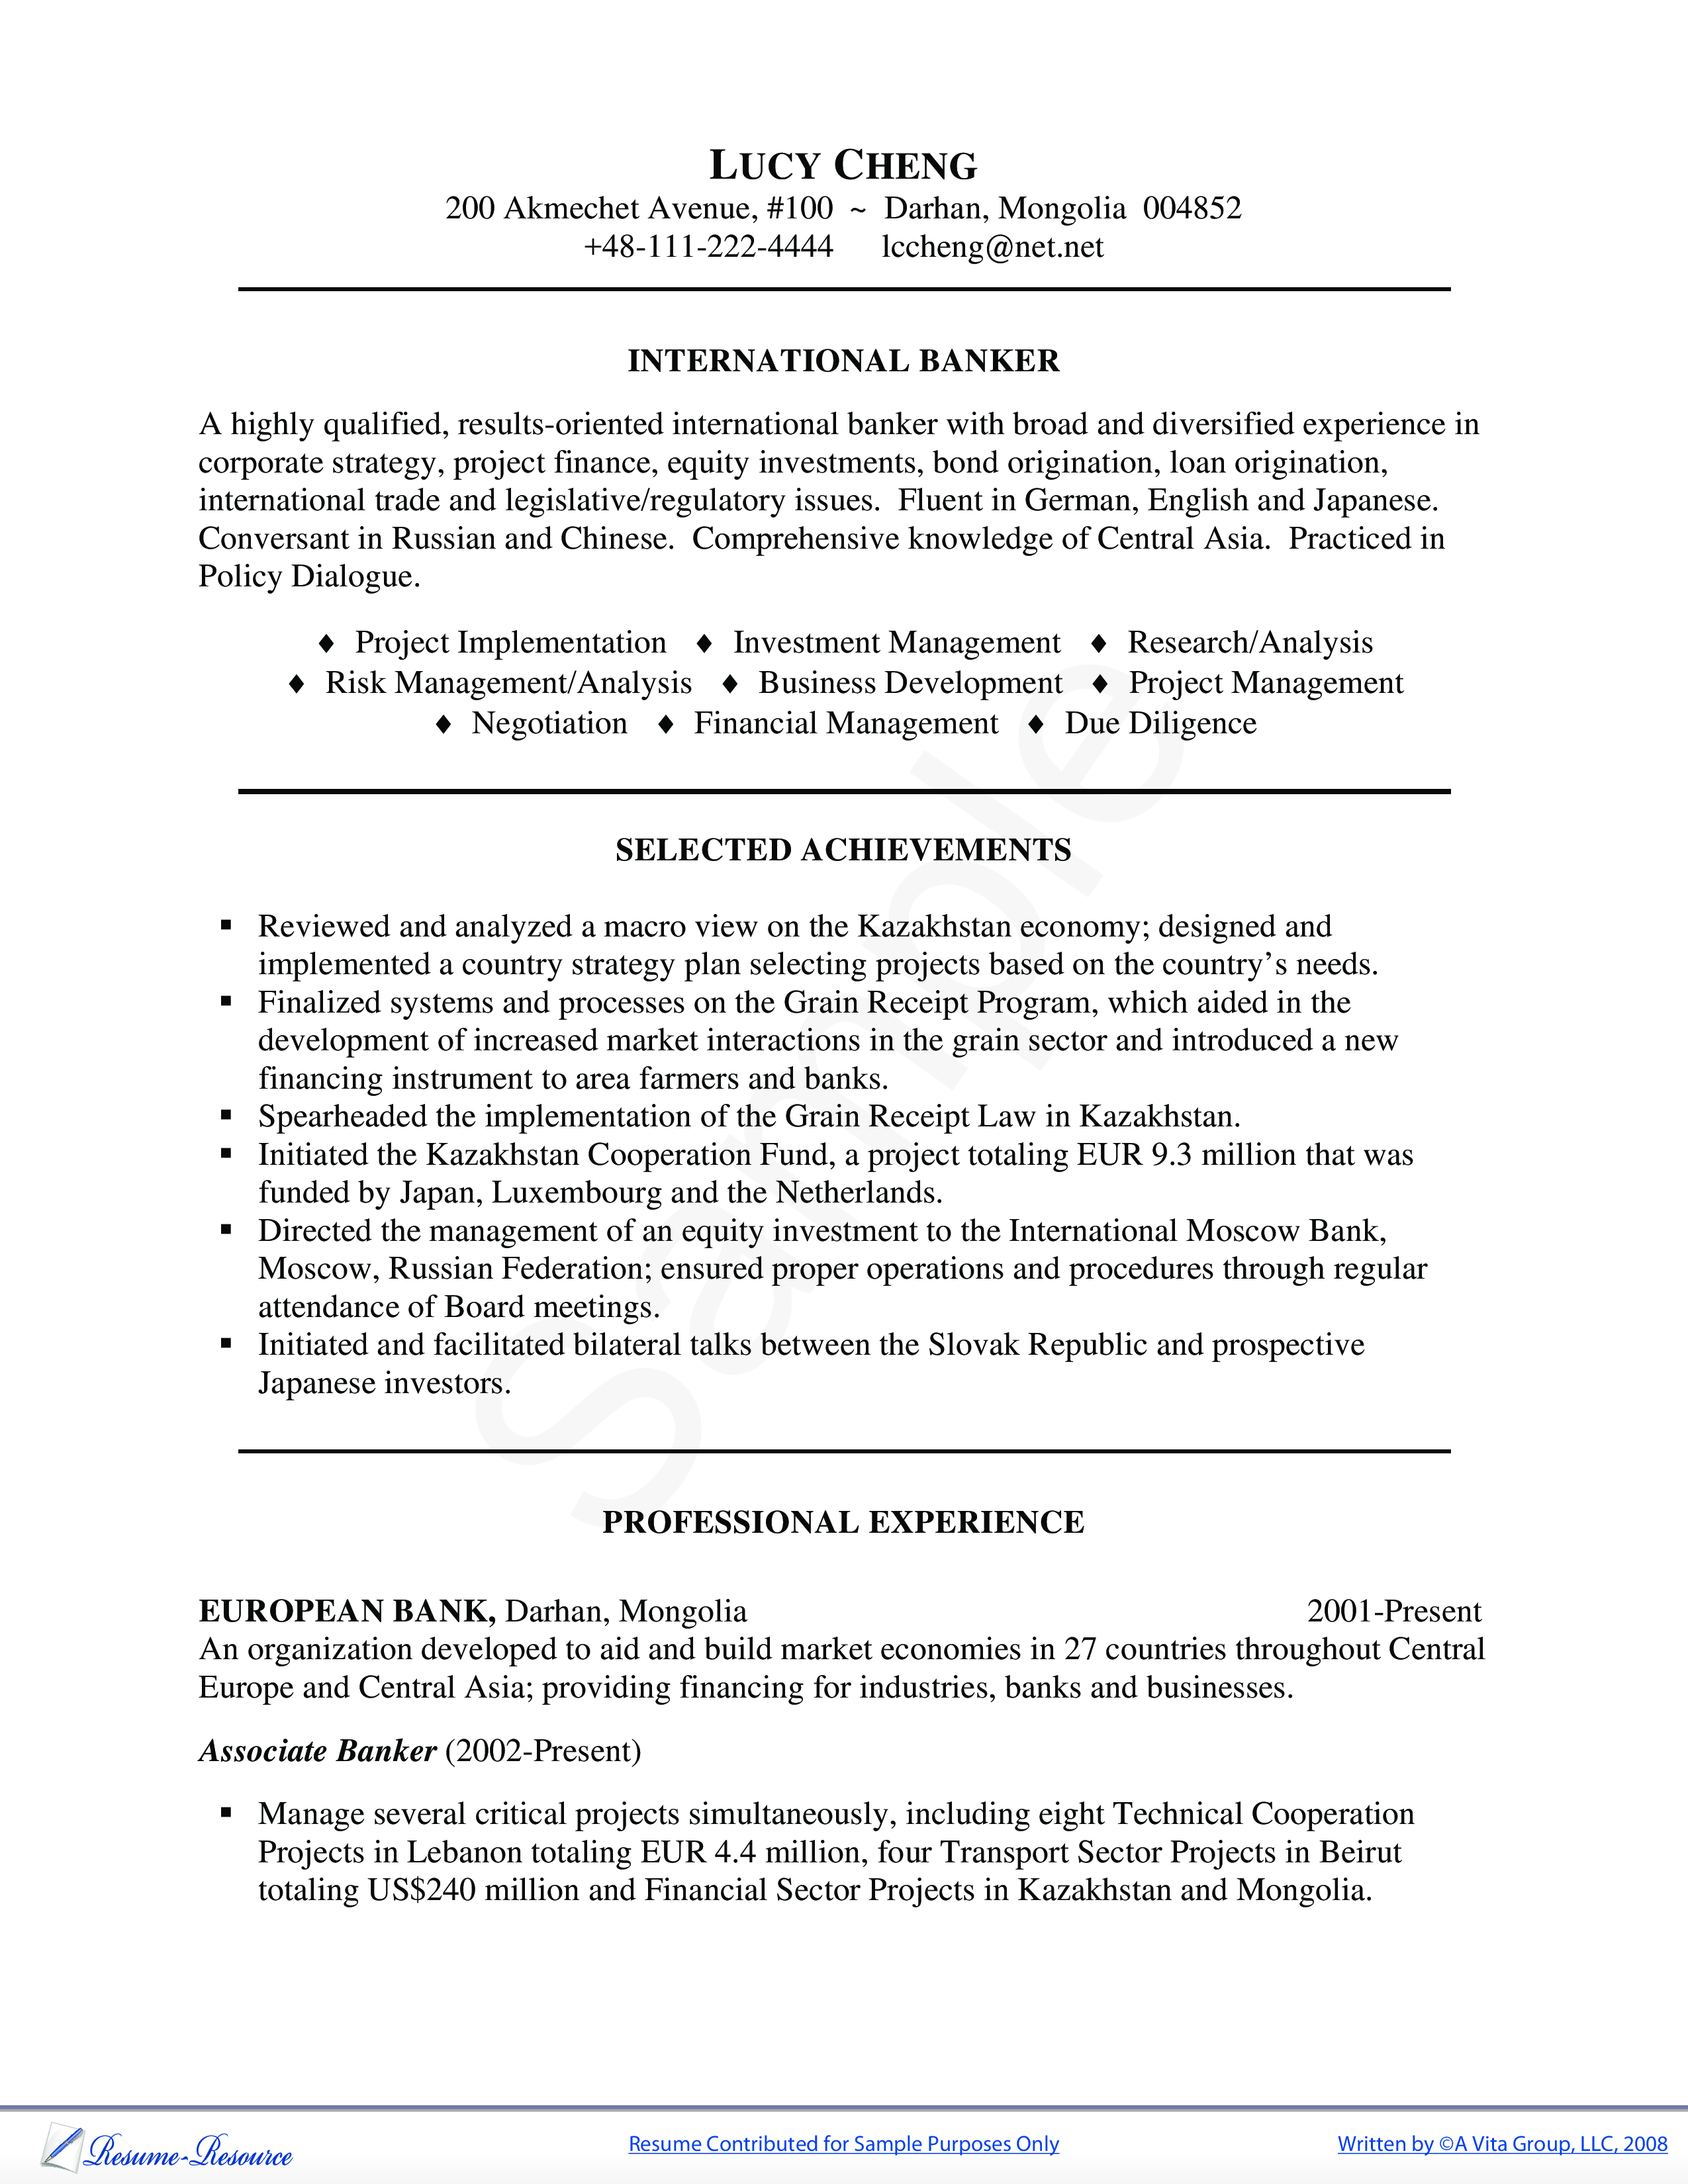 resume format for banking experience